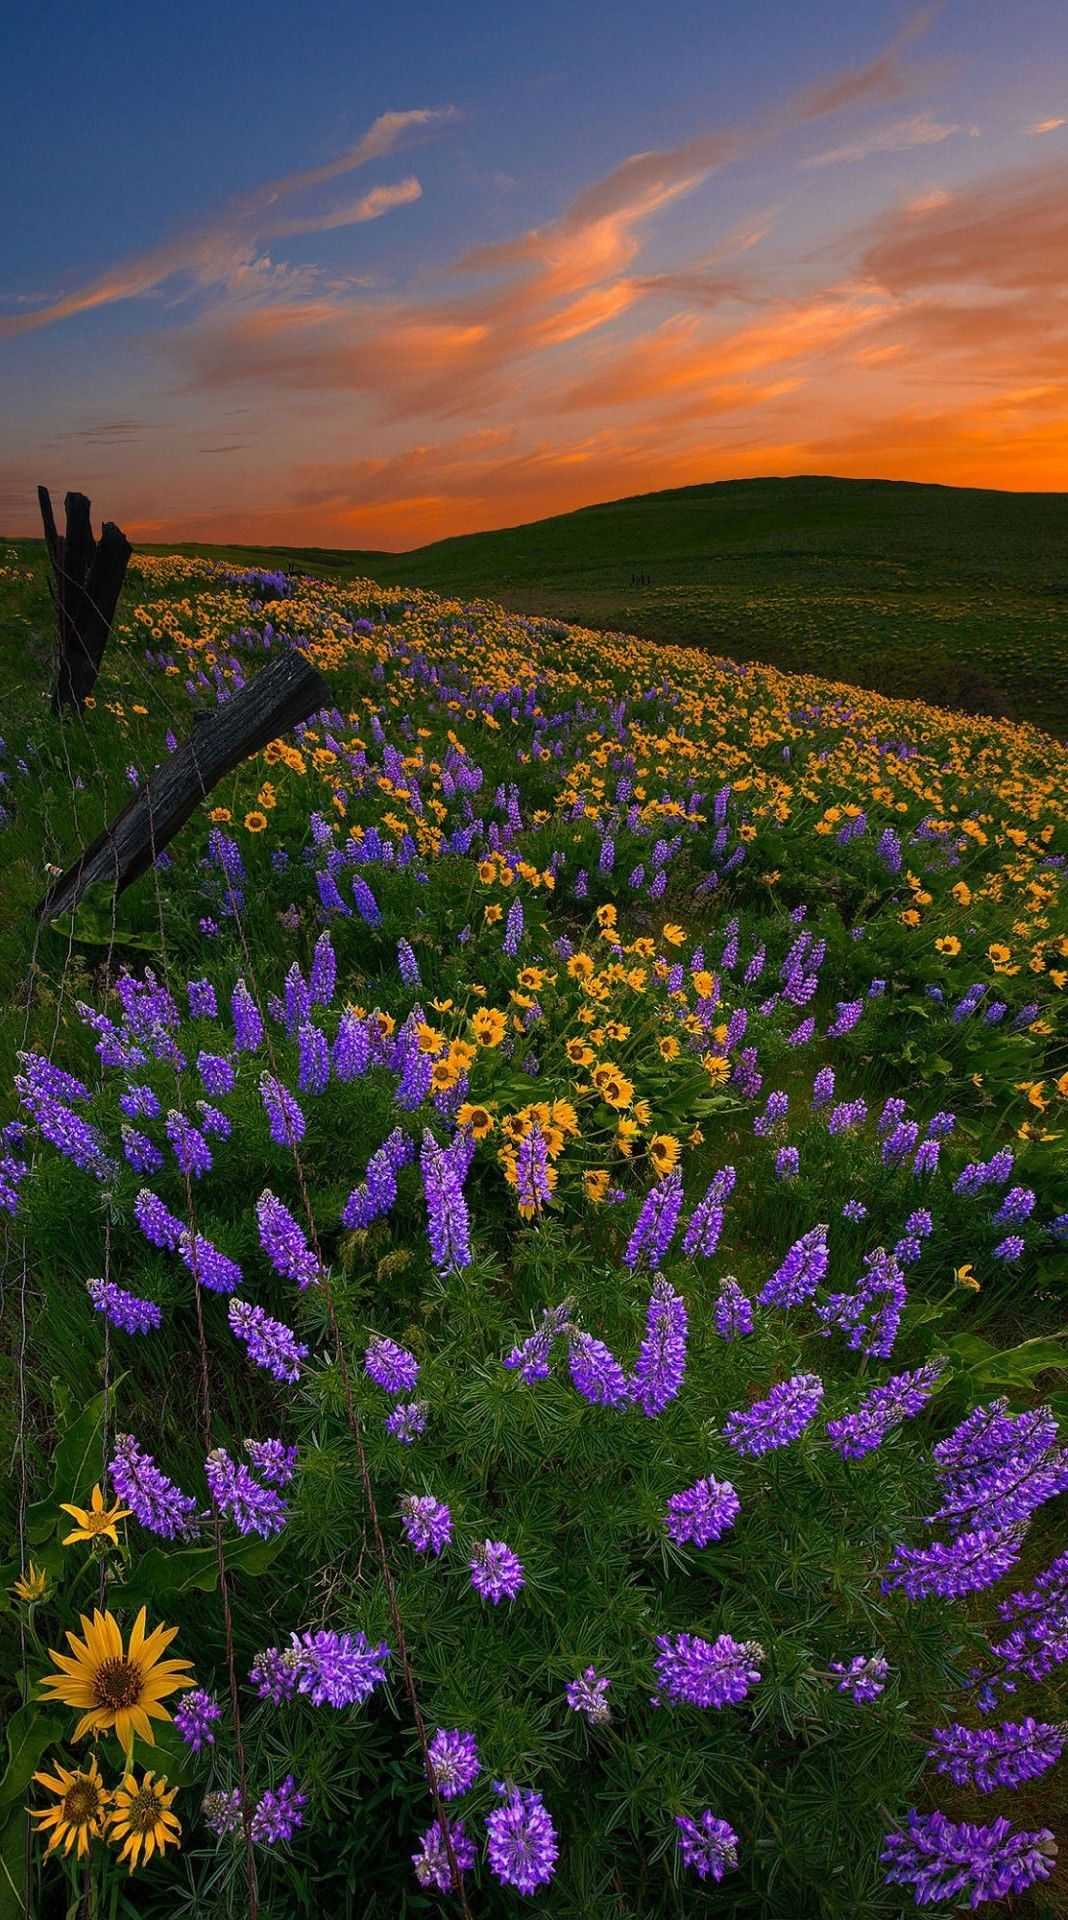 Lupine and sunflowers in the sunset - Cottagecore